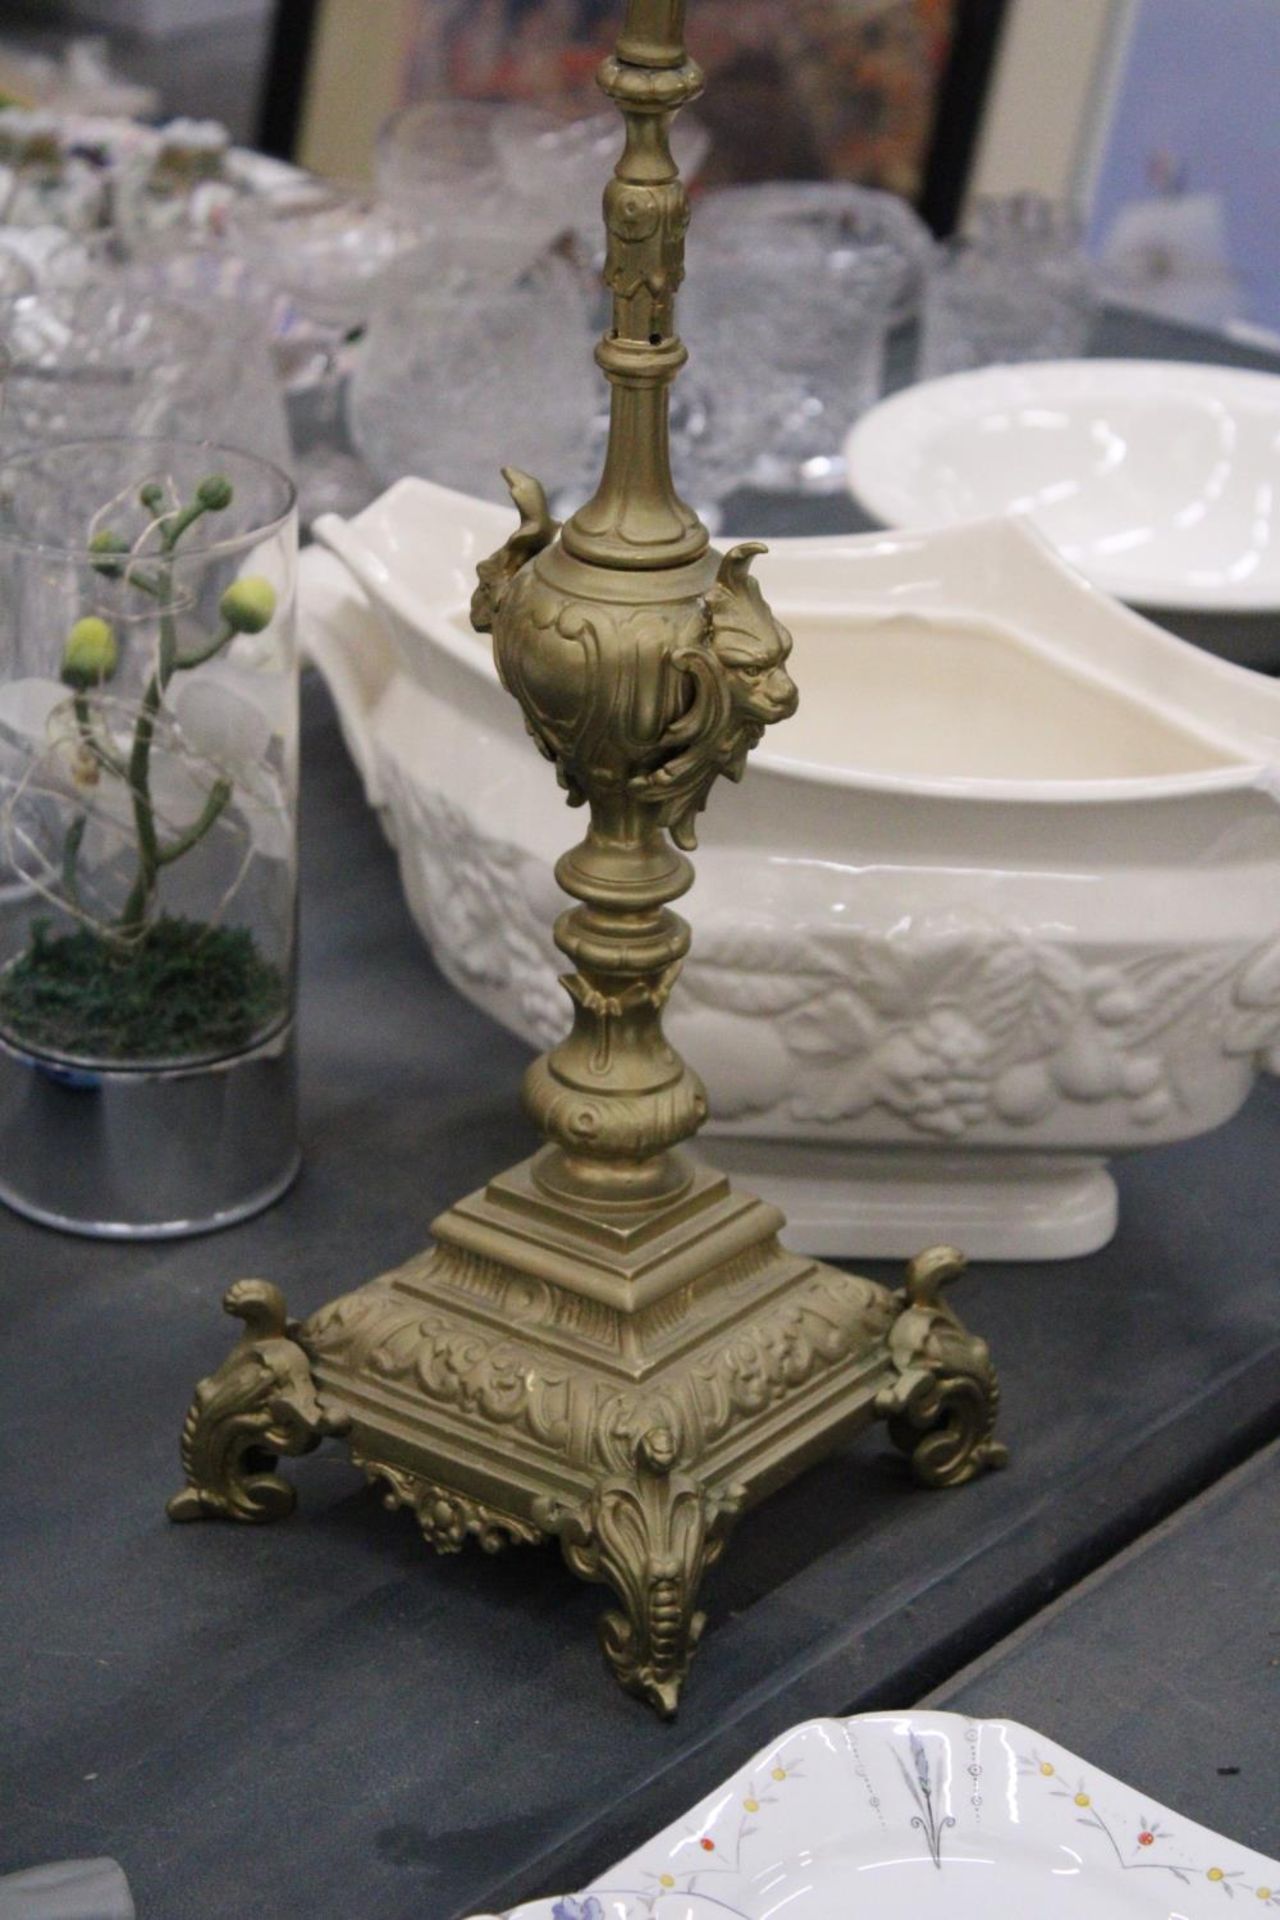 A VINTAGE STYLE HEAVY BRASS CANDLE HOLDER, HEIGHT 55CM - Image 6 of 6